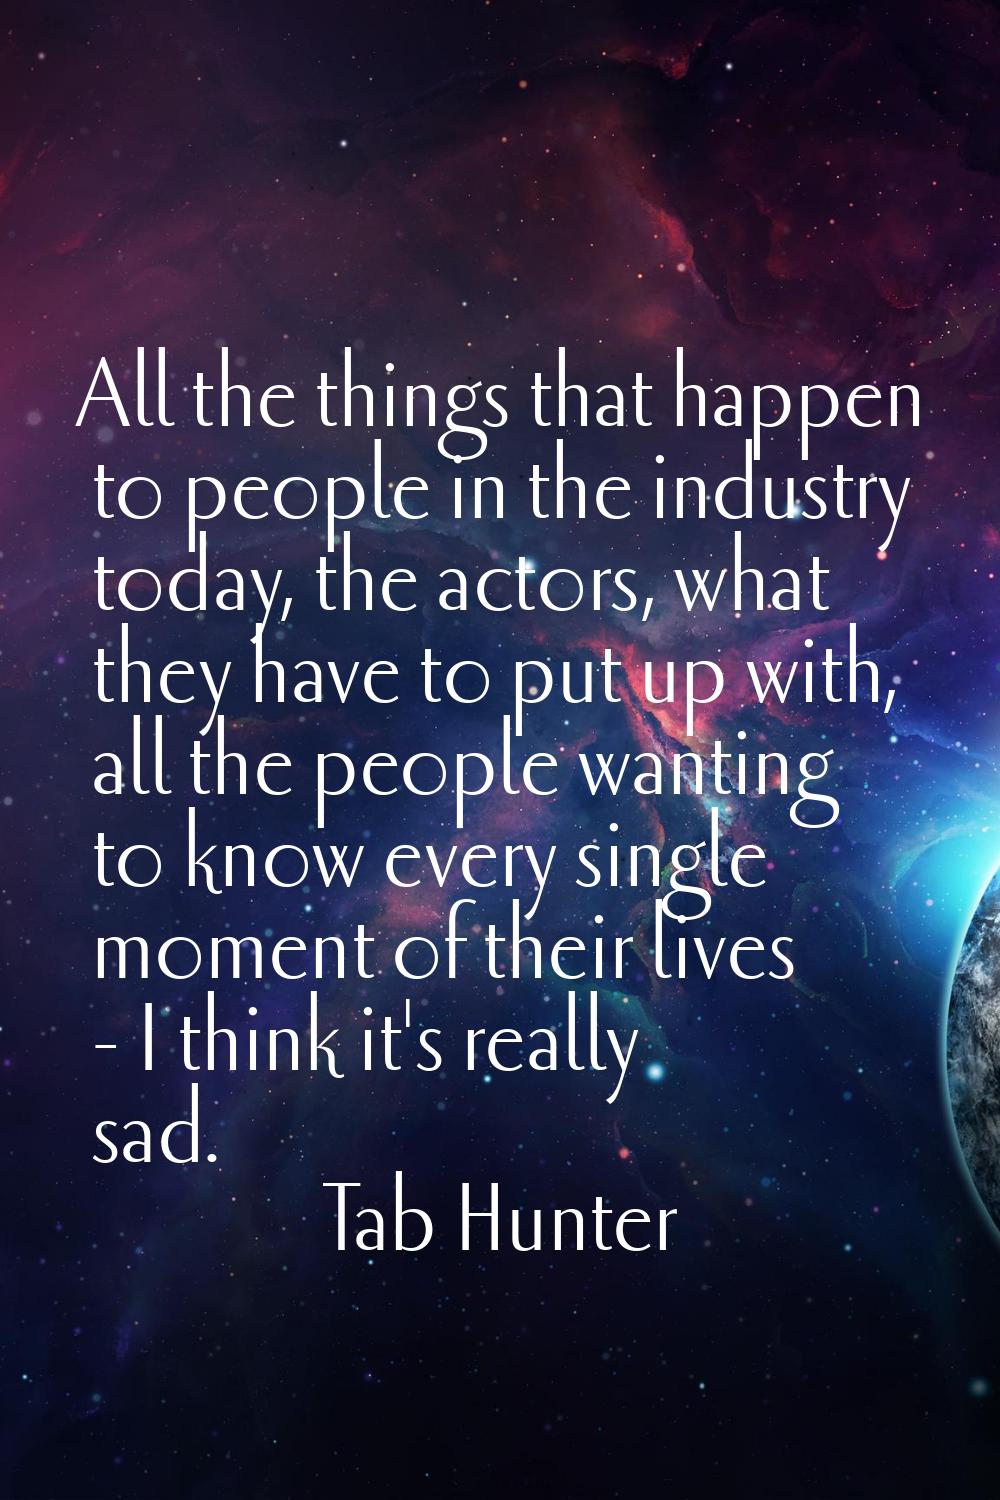 All the things that happen to people in the industry today, the actors, what they have to put up wi